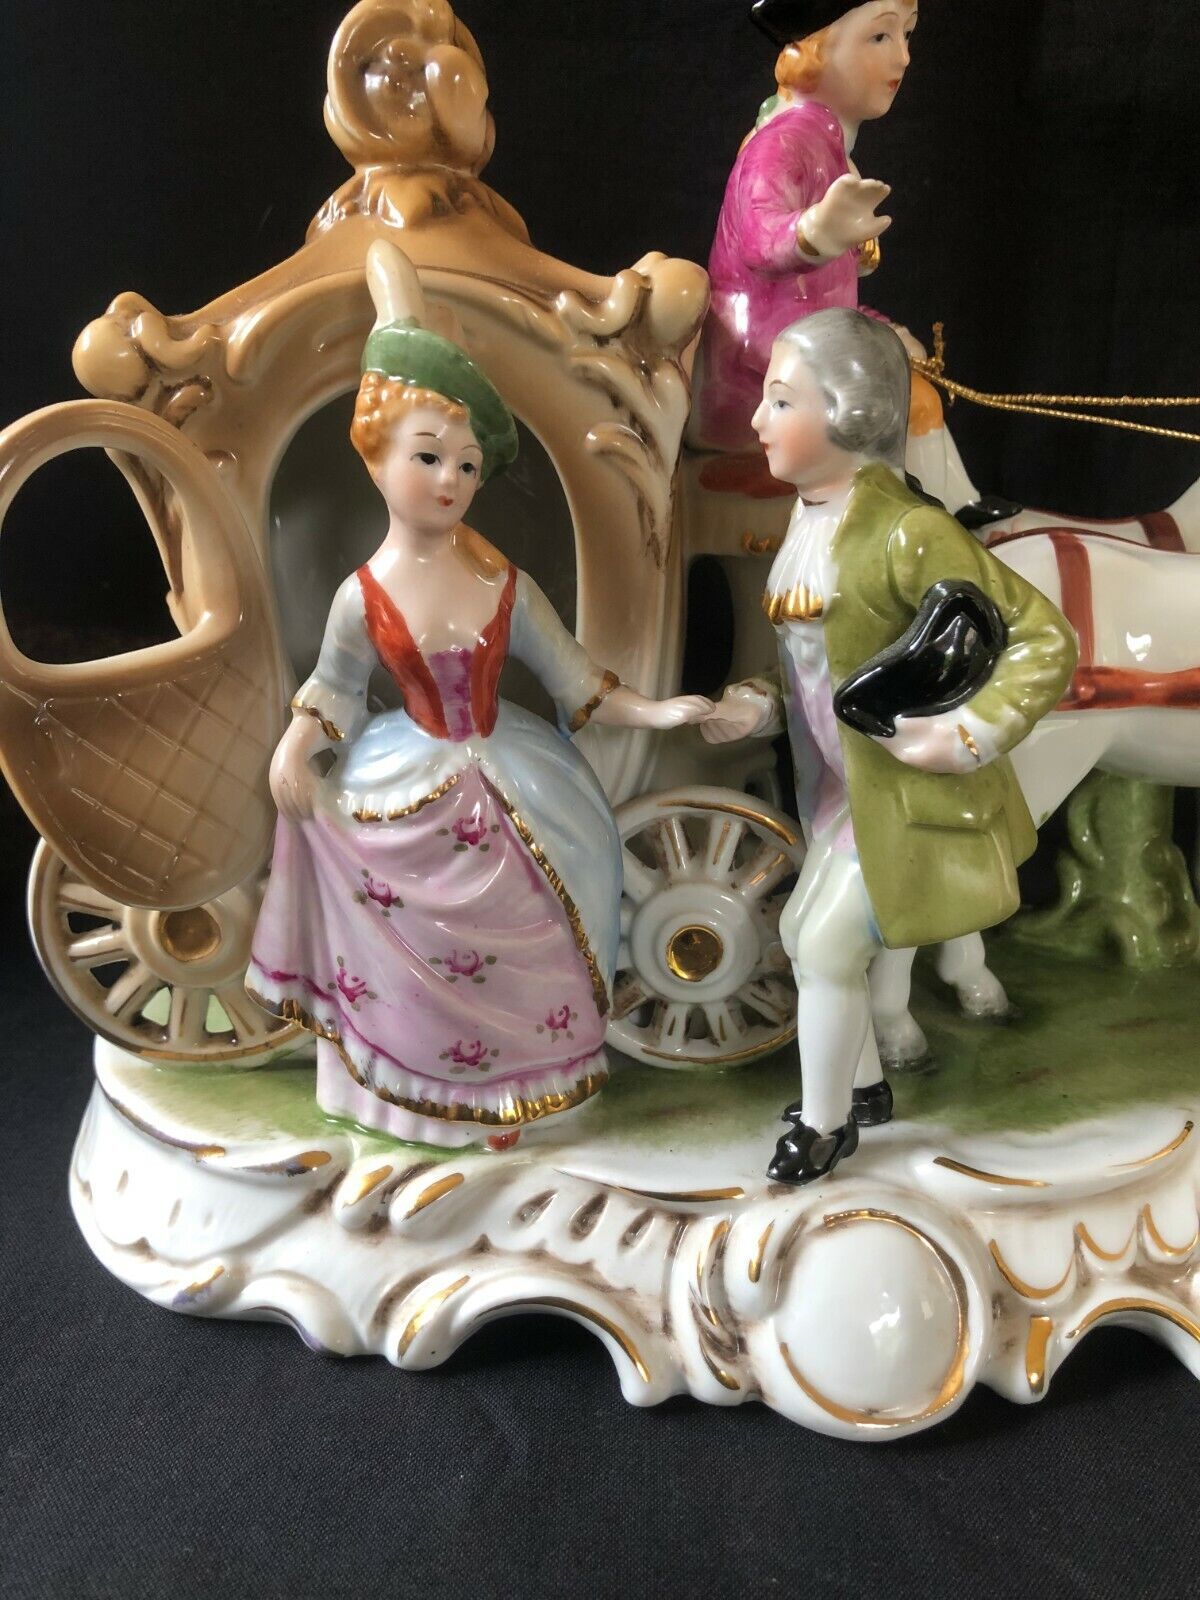 Primary image for ANTIQUE HORSE CARRIAGE STATUE PORCELAIN GERMANY